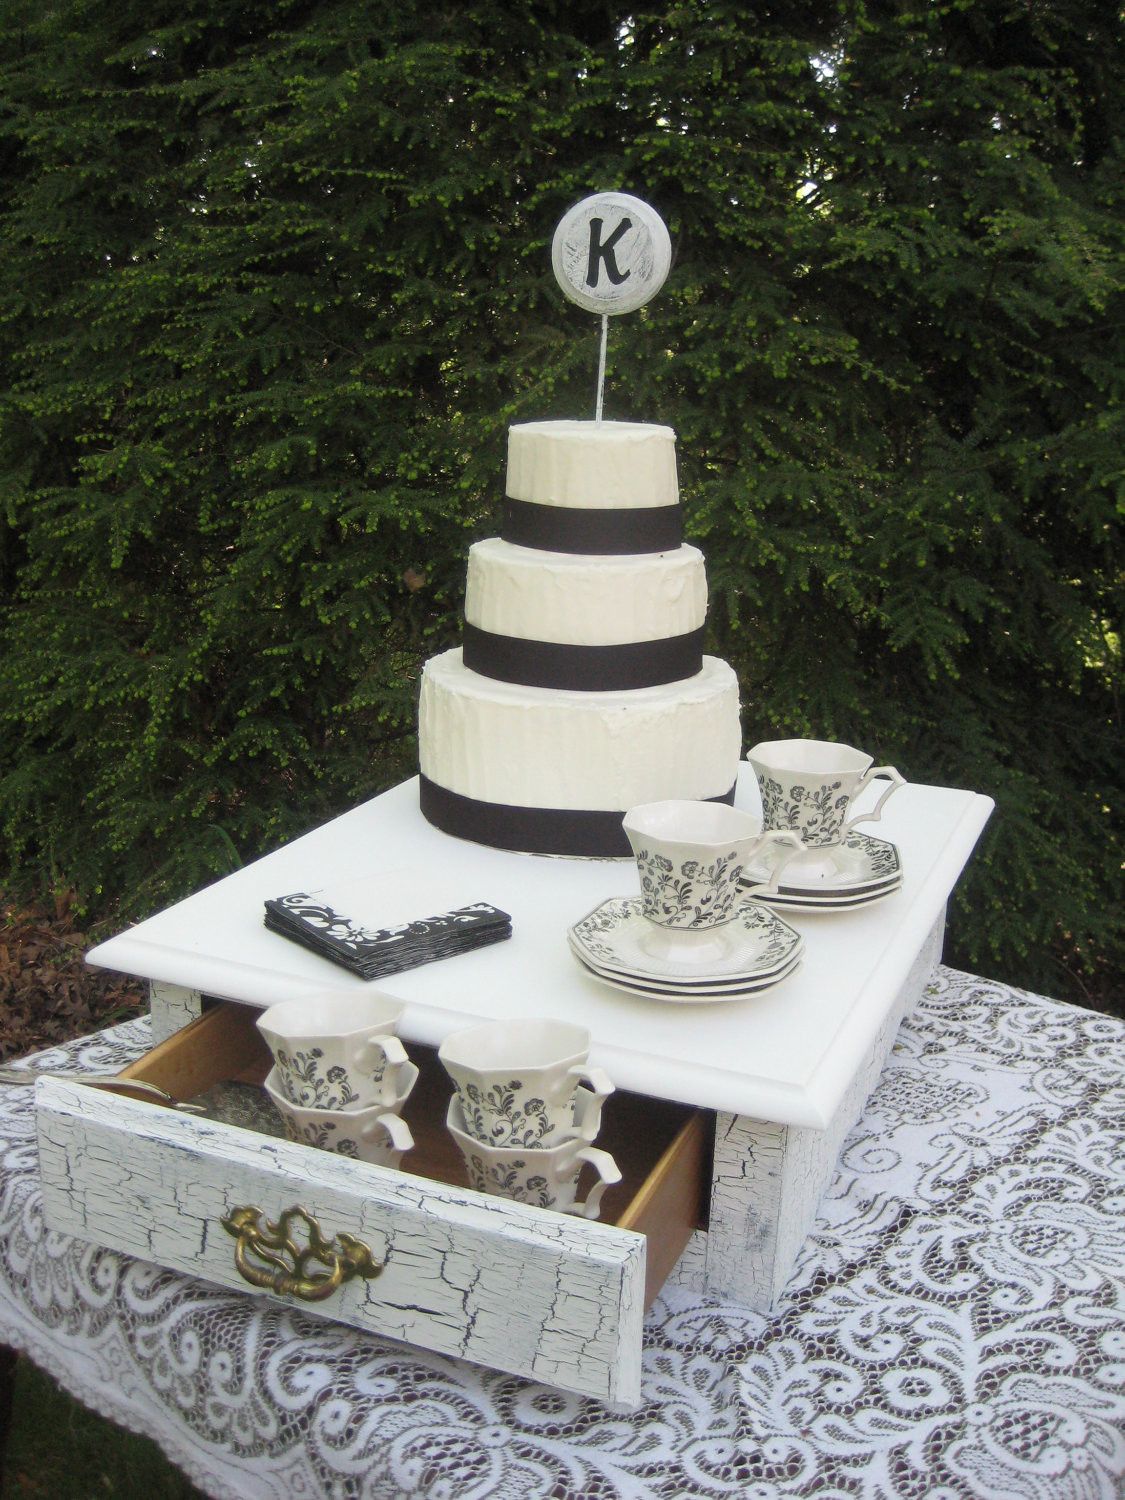 Wedding Cakes For Sale
 Wedding Cake Stands For Sale